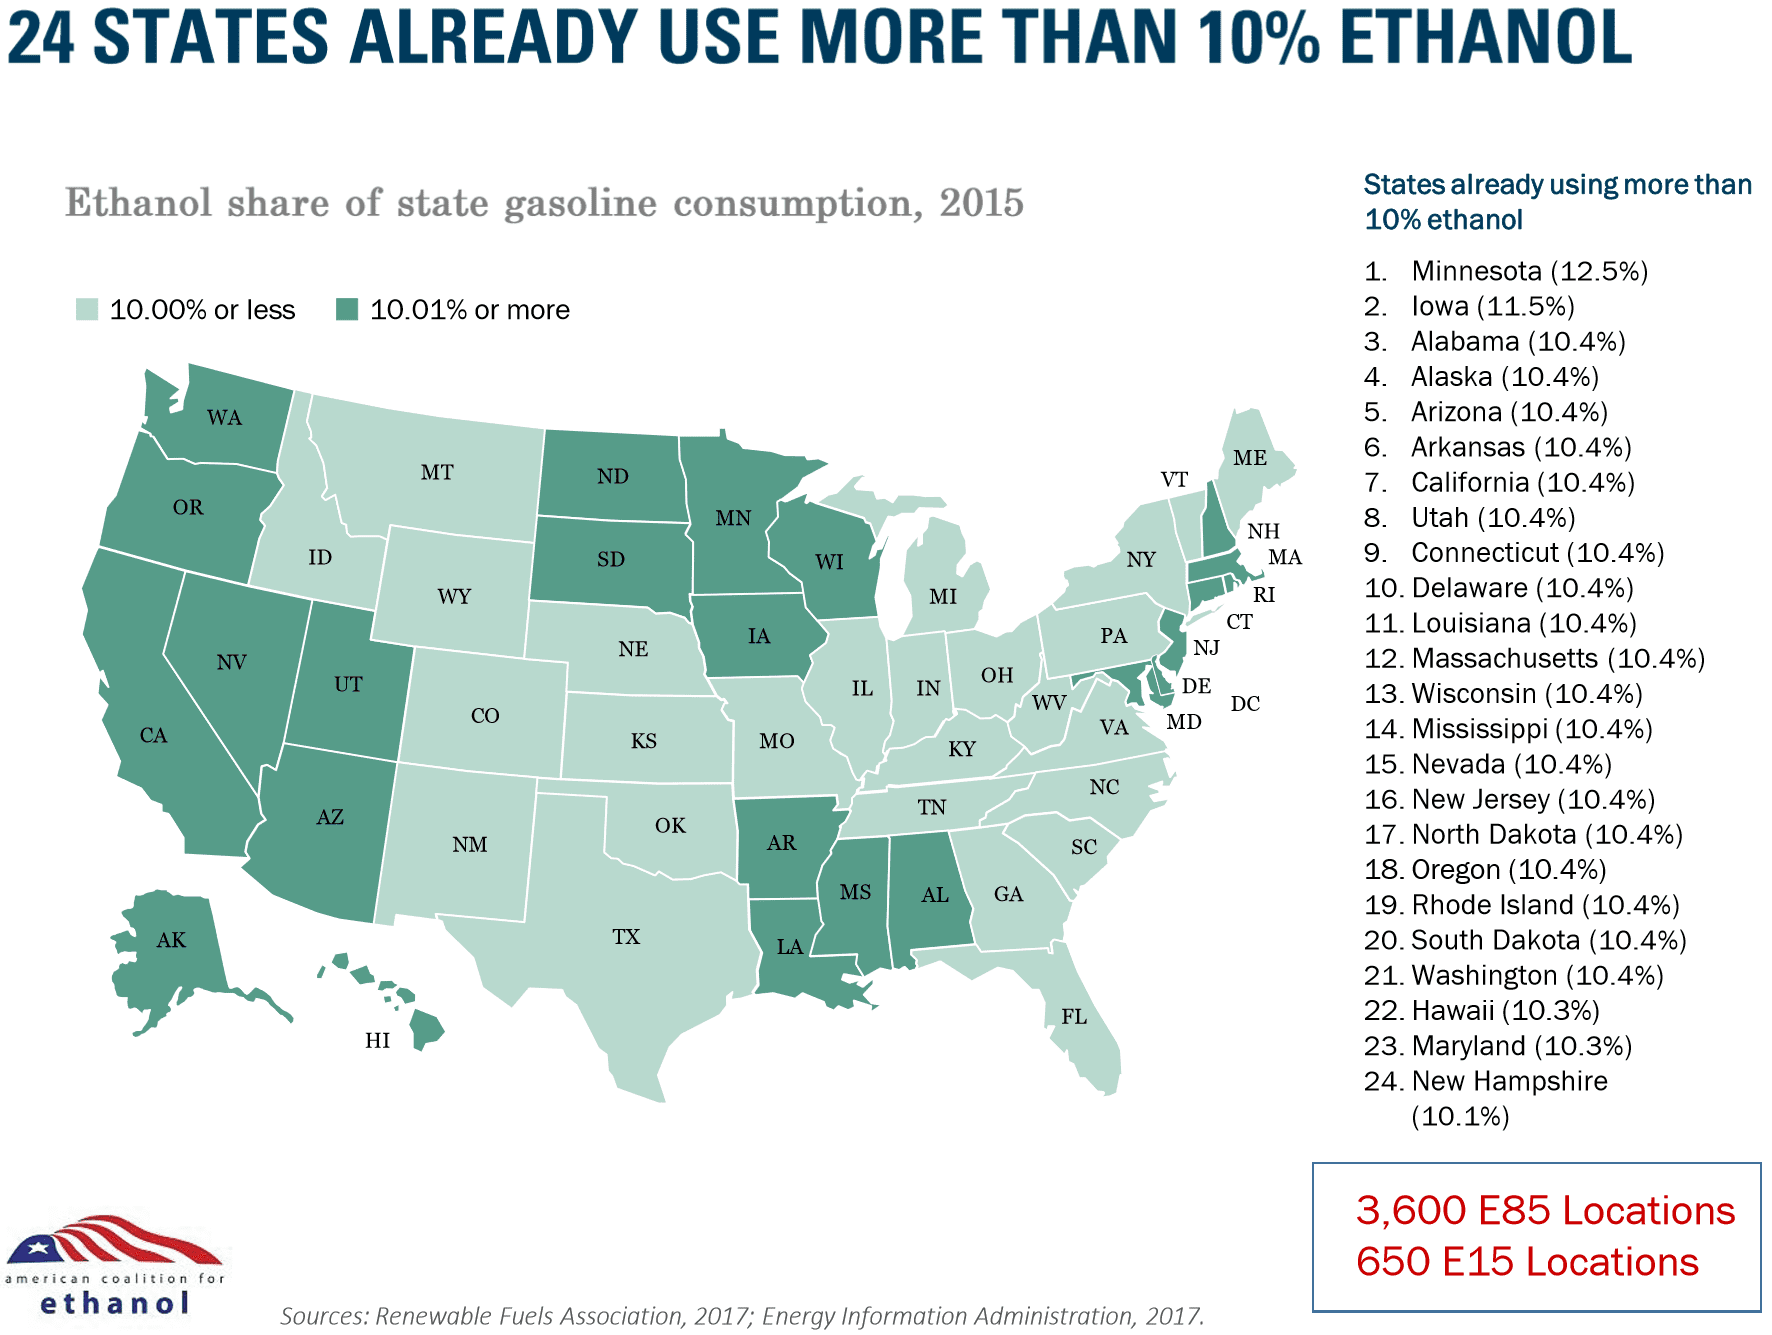 Info Graphic of States that use more than 10% Ethanol